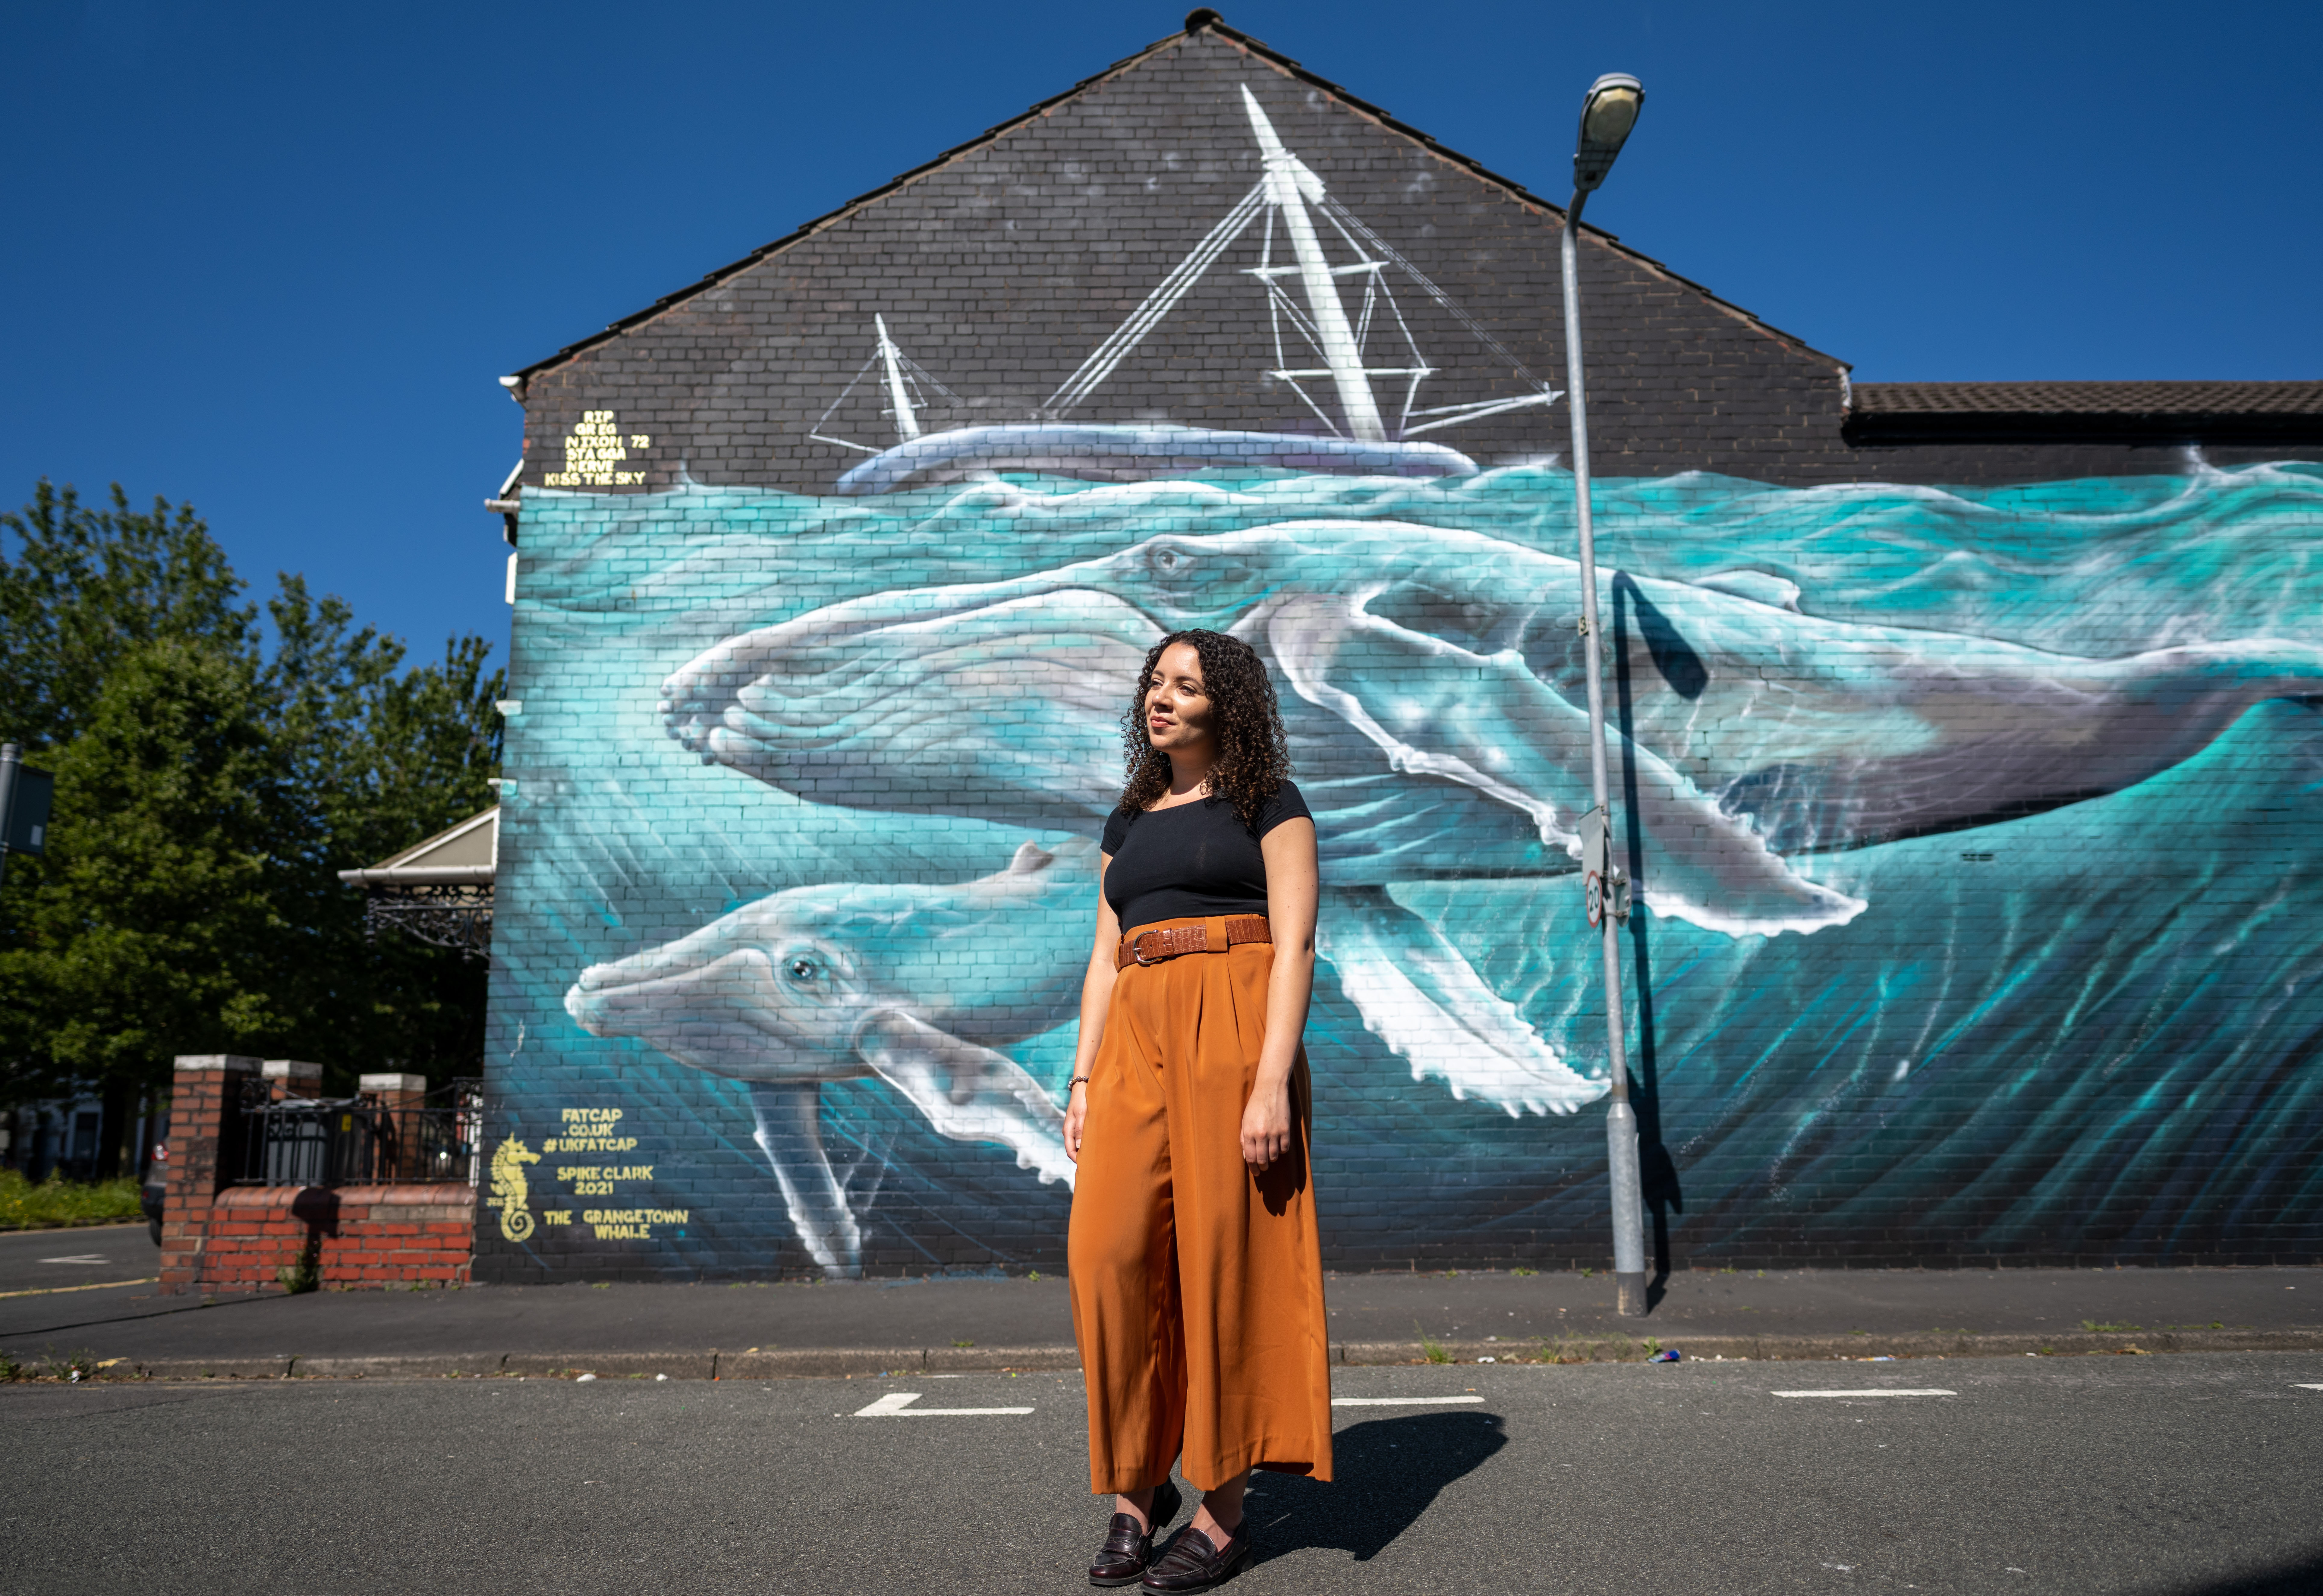 Our Poet in Residence Taylor Edmonds standing in front of a giant whale mural in Cardiff which highlights global warming and rising sea levels.